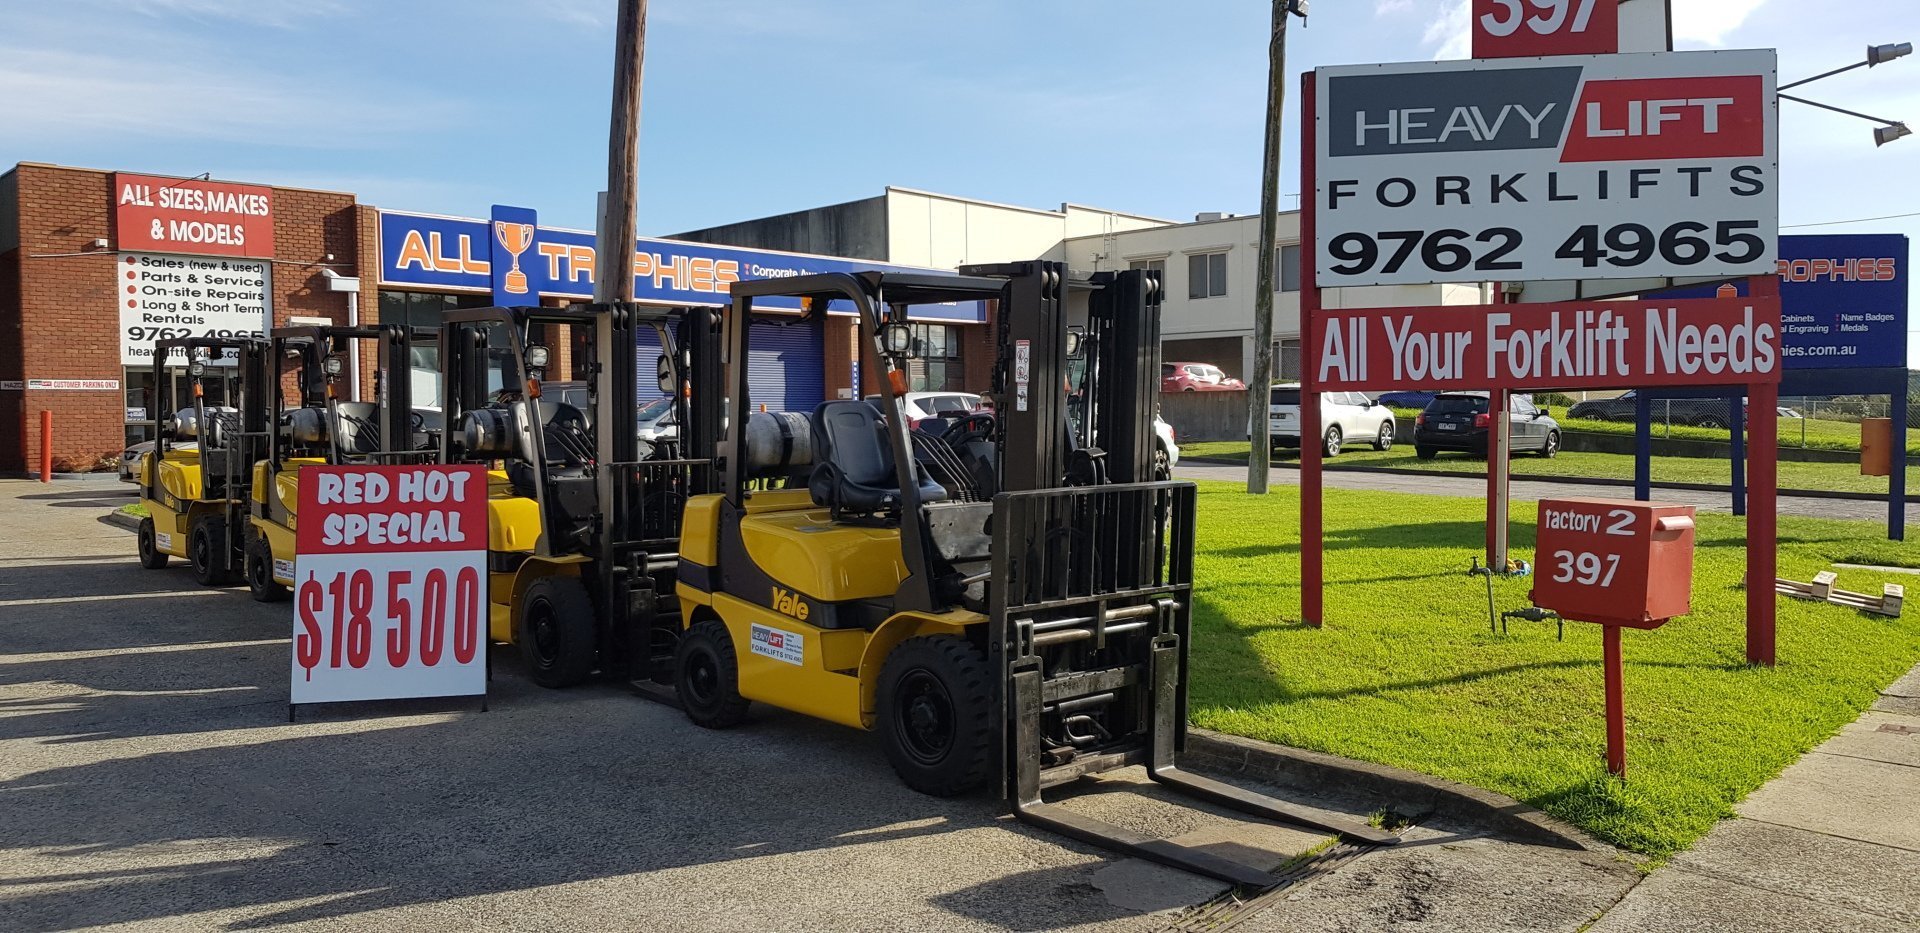 Yale 2 5t Glp25rk Container Mast Forklift On Sale Min 2000 00 Trade In